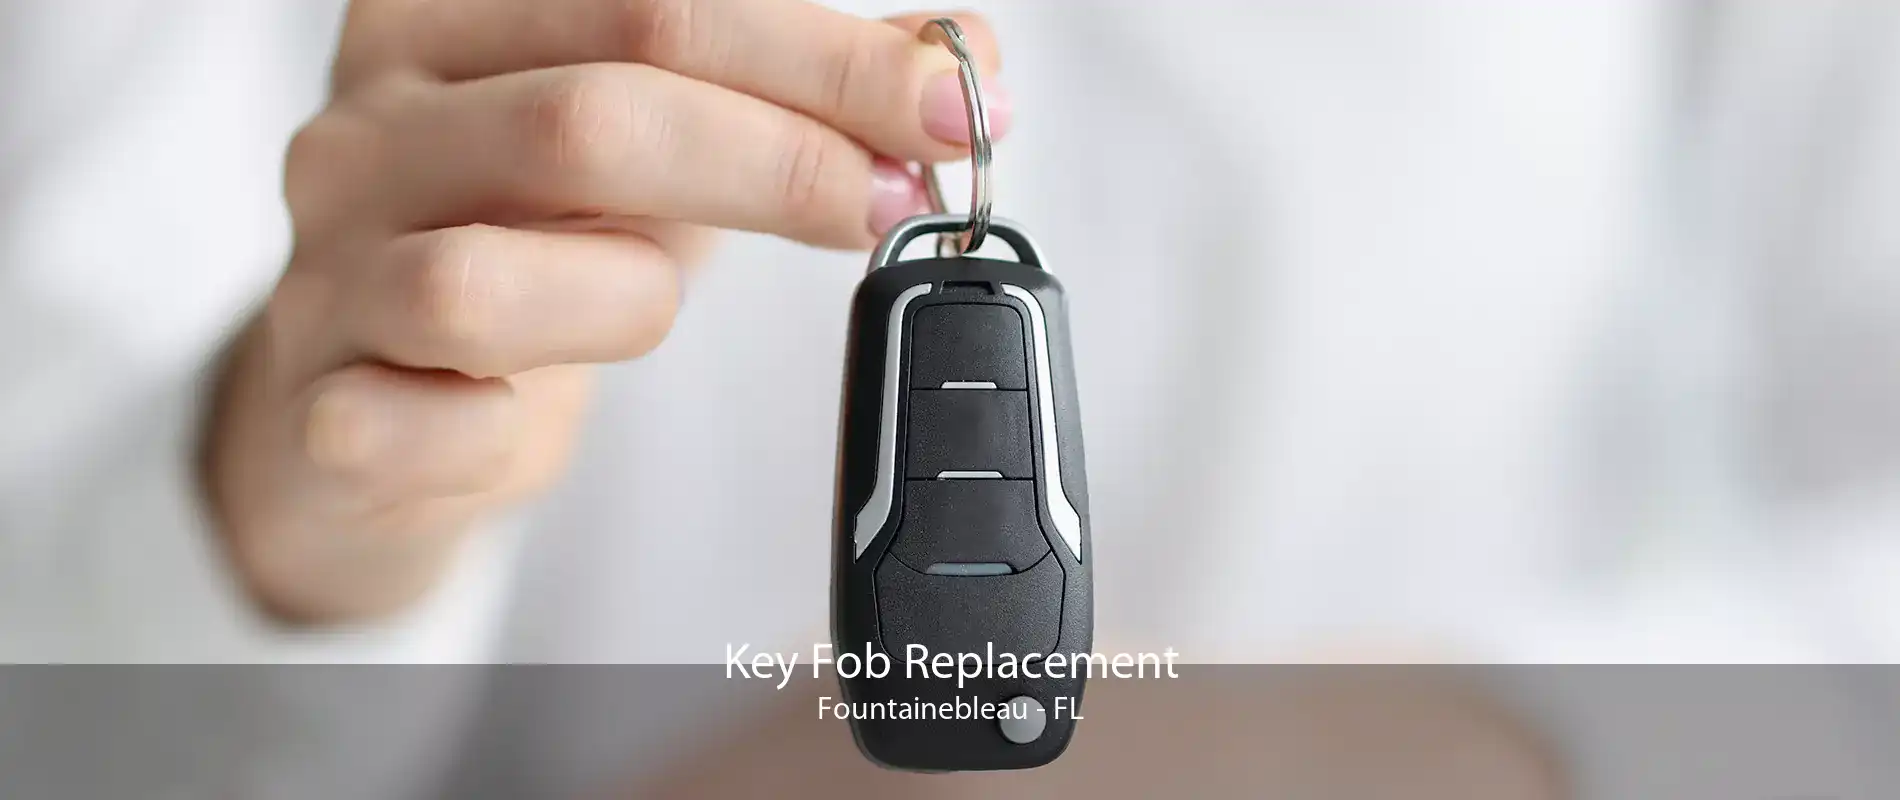 Key Fob Replacement Fountainebleau - FL